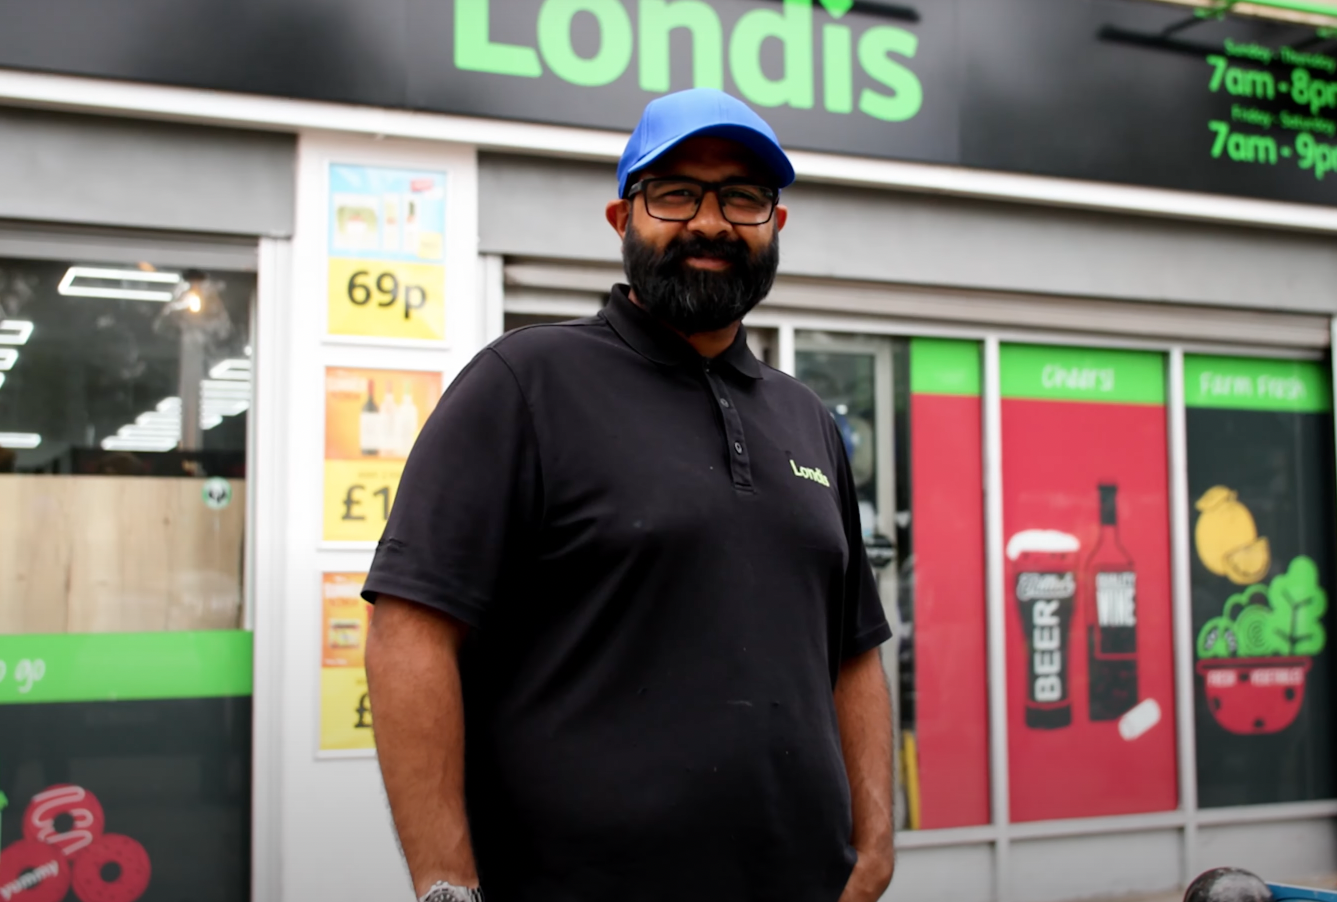 NearSt doubles Londis store Google visibility, boosting footfall, sales